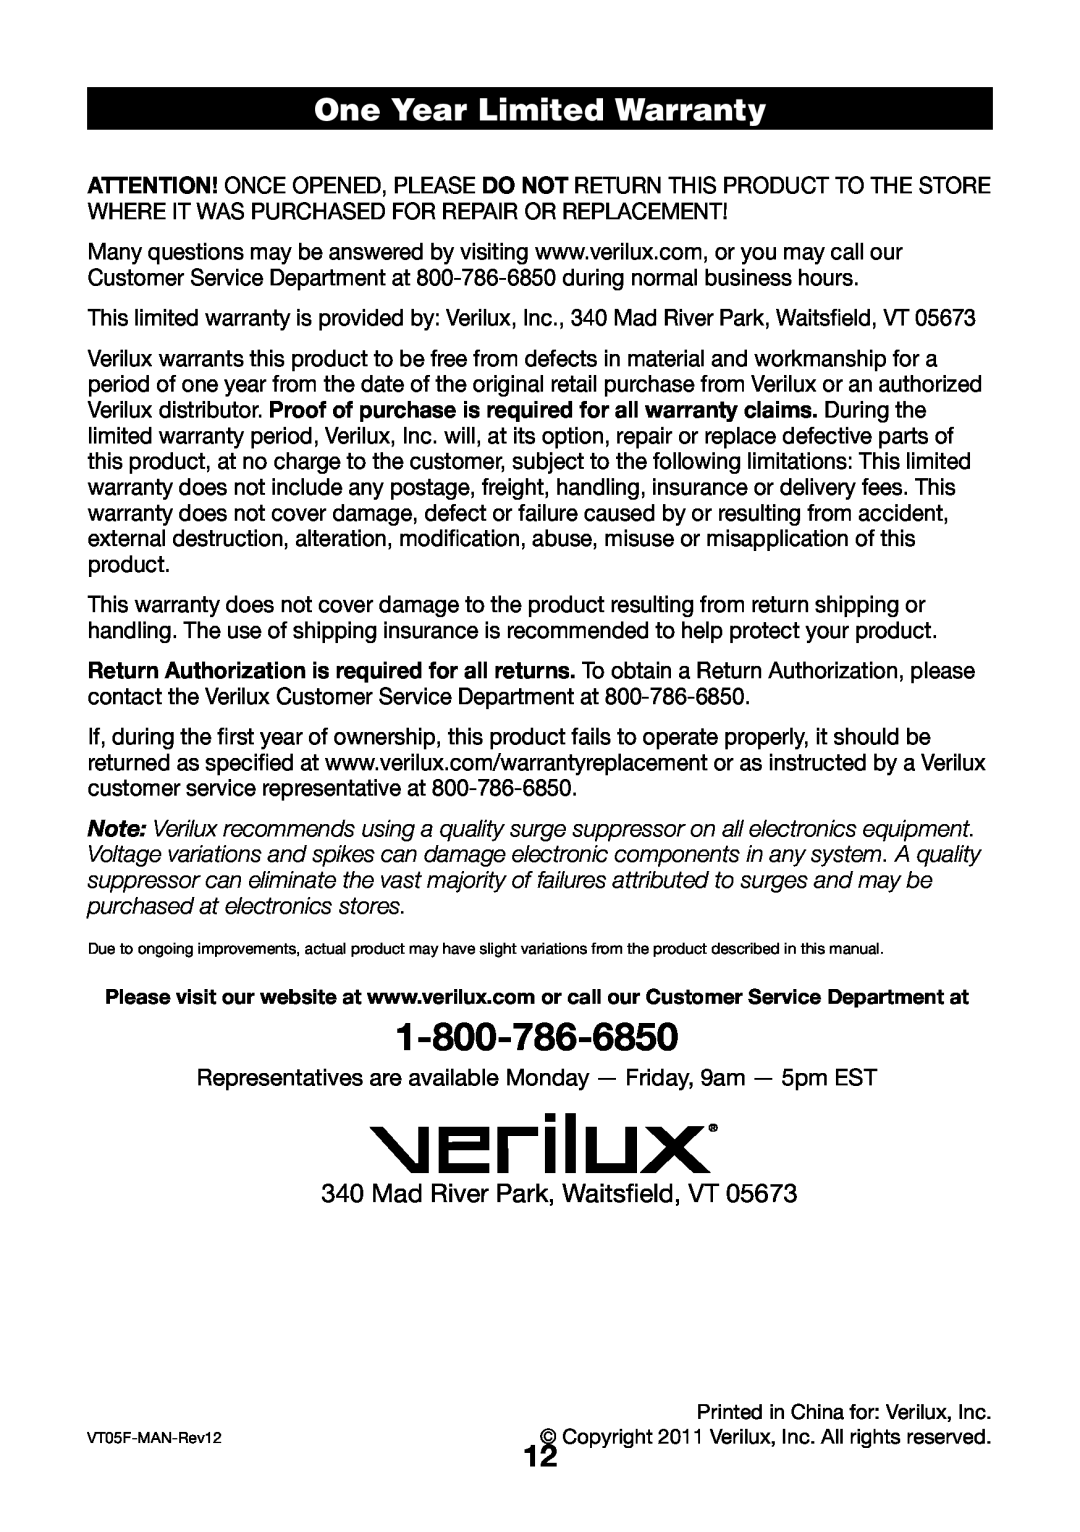 Verilux VT05 manual One Year Limited Warranty, Mad River Park, Waitsfield, VT 